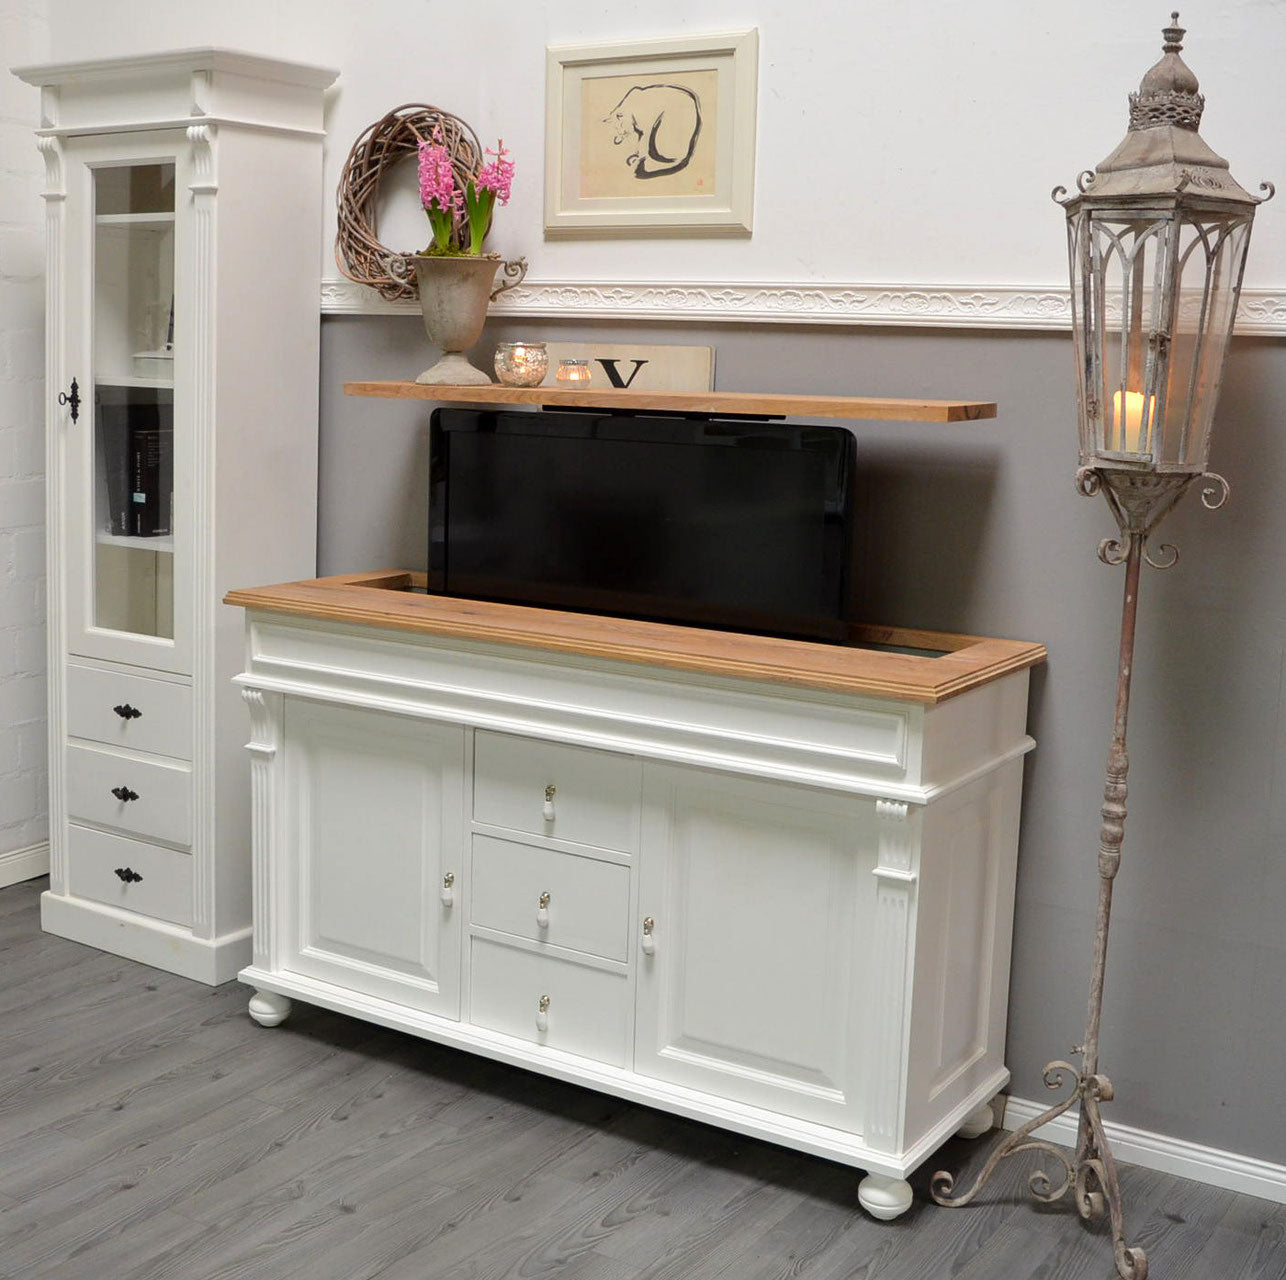 "Noemi": TV cabinet with lift for 55 inch or 65 inch in country house style